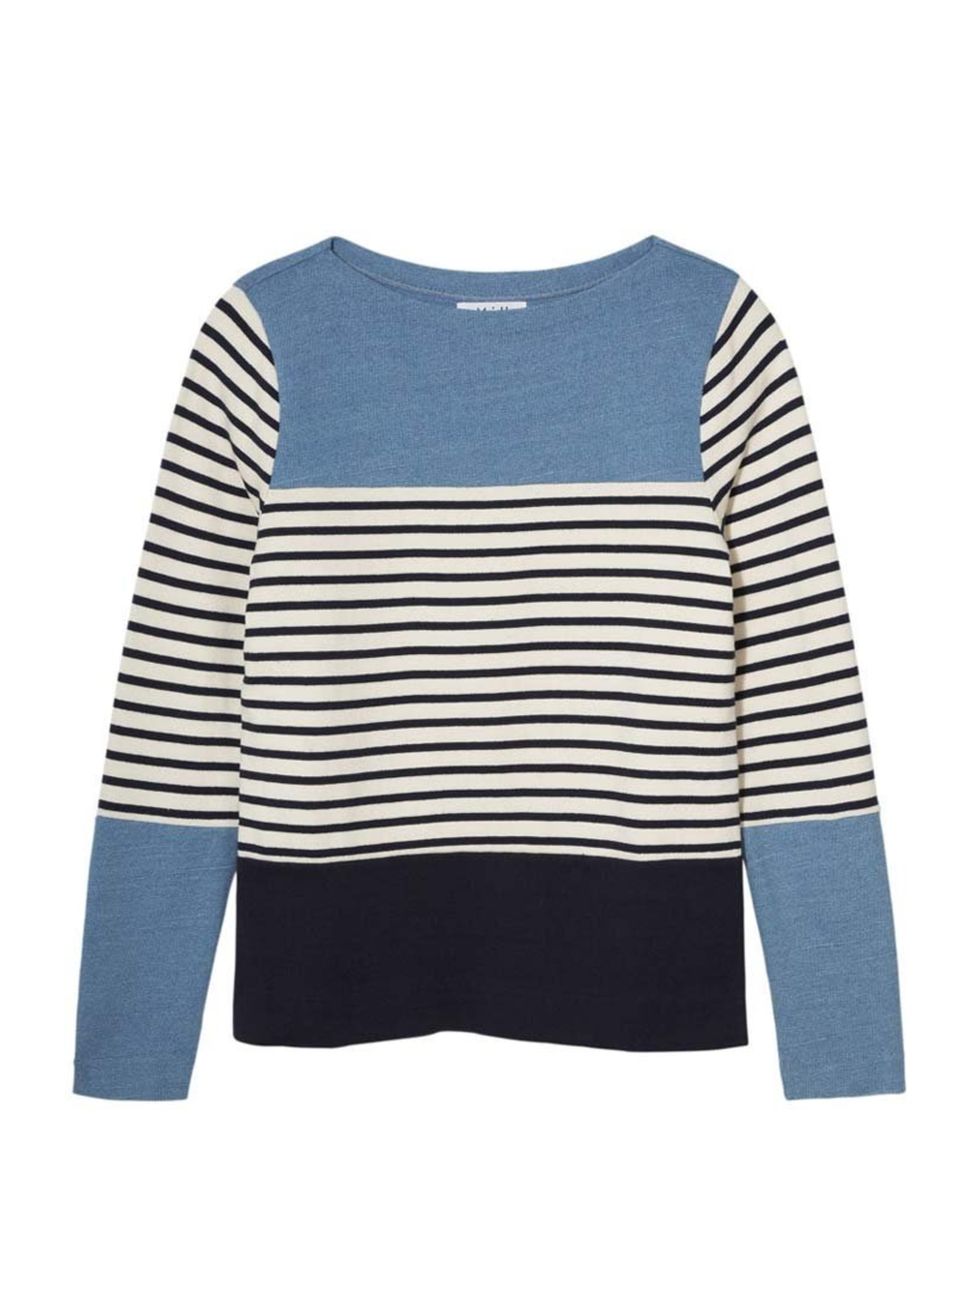 <p>Perfect with white jeans when the sun finally puts his hat on. </p><p><a href="http://www.mih-jeans.com/tops/the-breton-top-stripe/indigo-knit.html">MiH</a> top, £115</p>